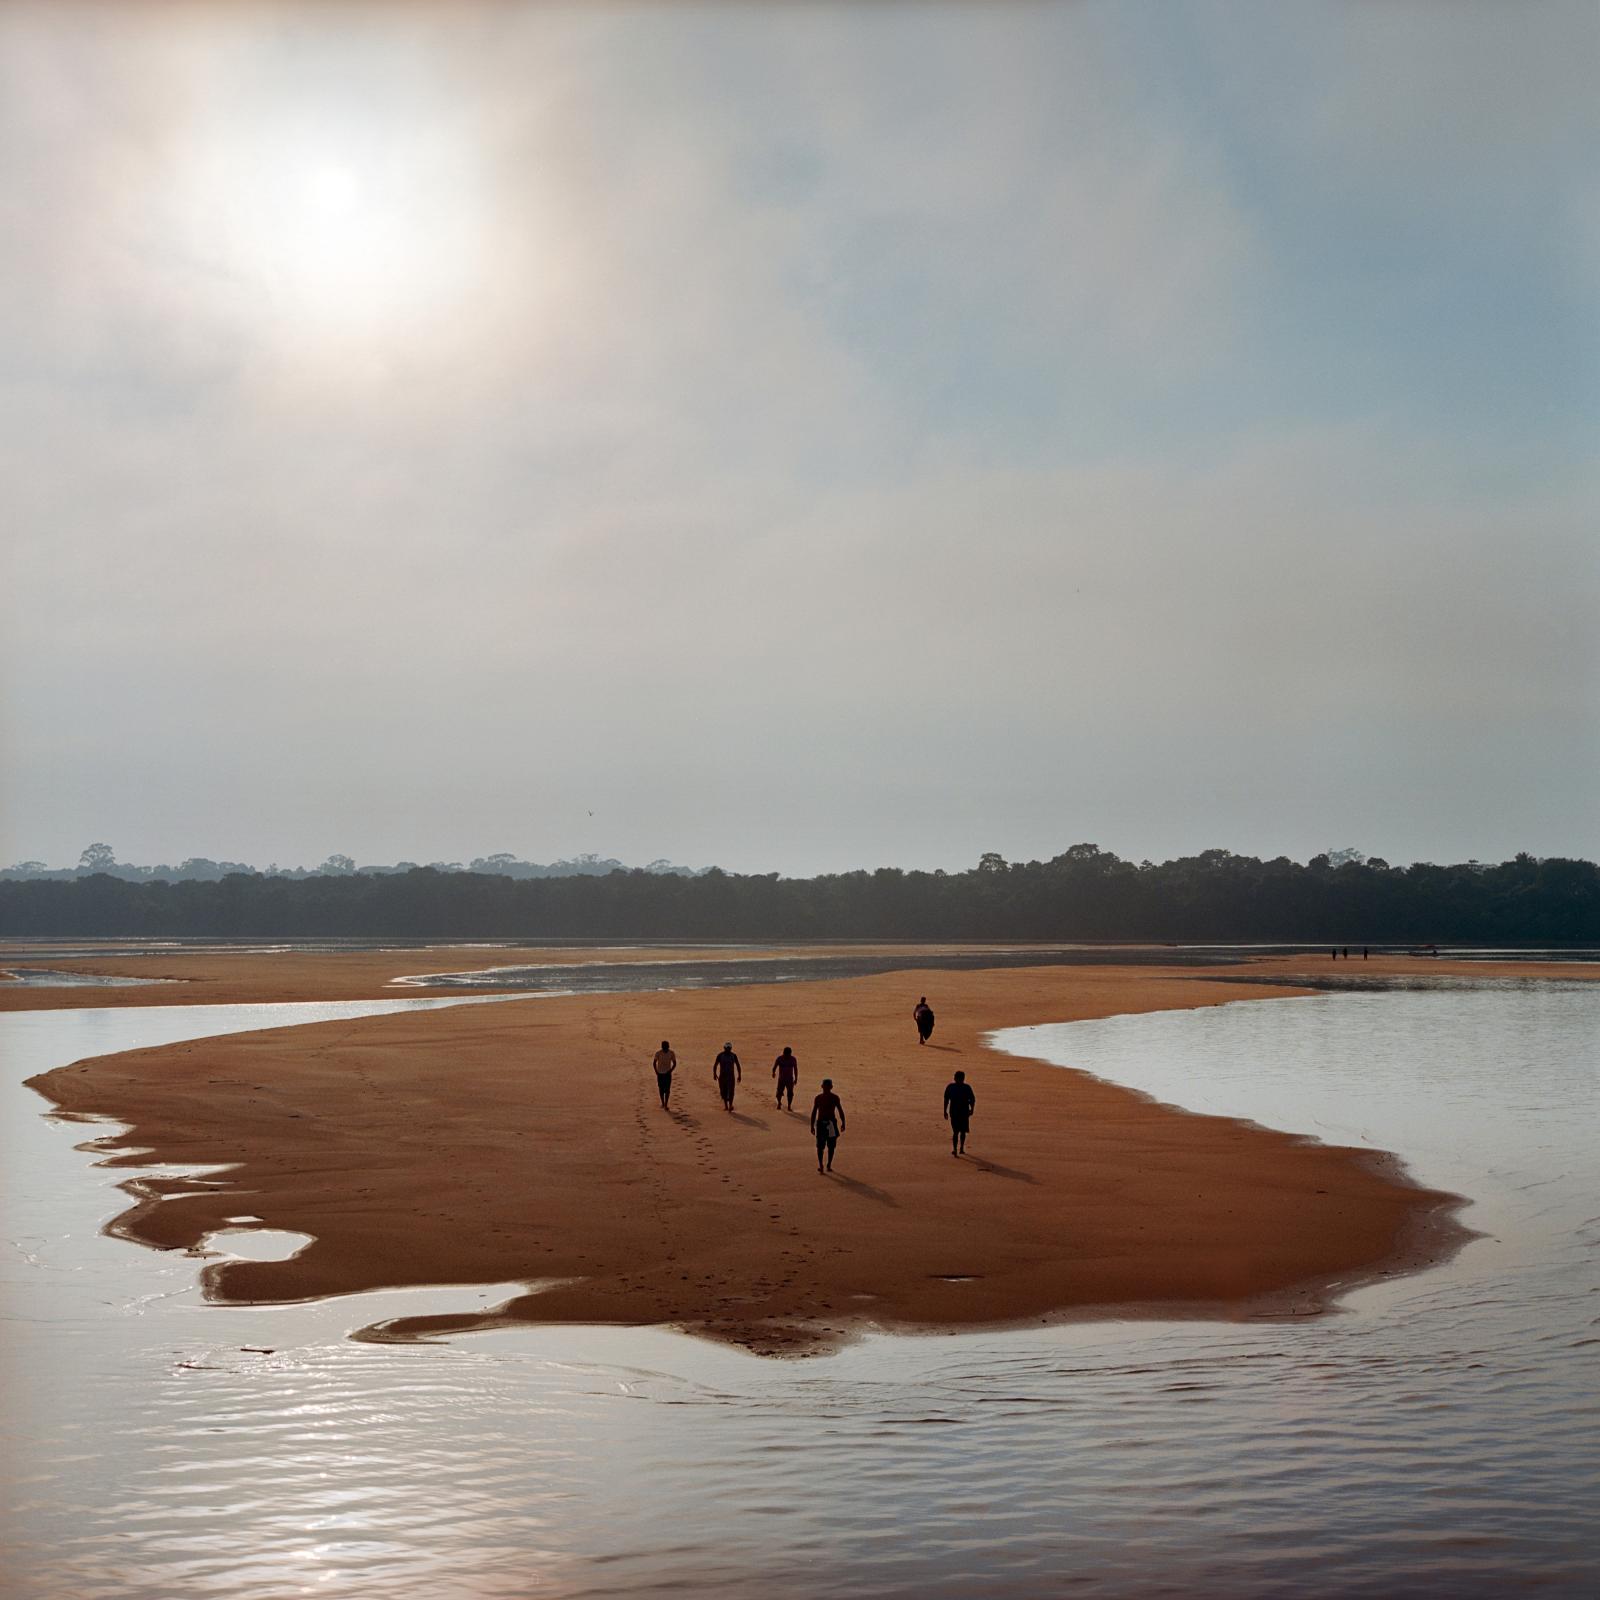 Members of the Munduruku indigenous tribe walk on a sandbar on the Tapajos River as they prepare for a protest against plans to construct a series of hydroelectric dams on their river in Para State, Brazil. 2014.